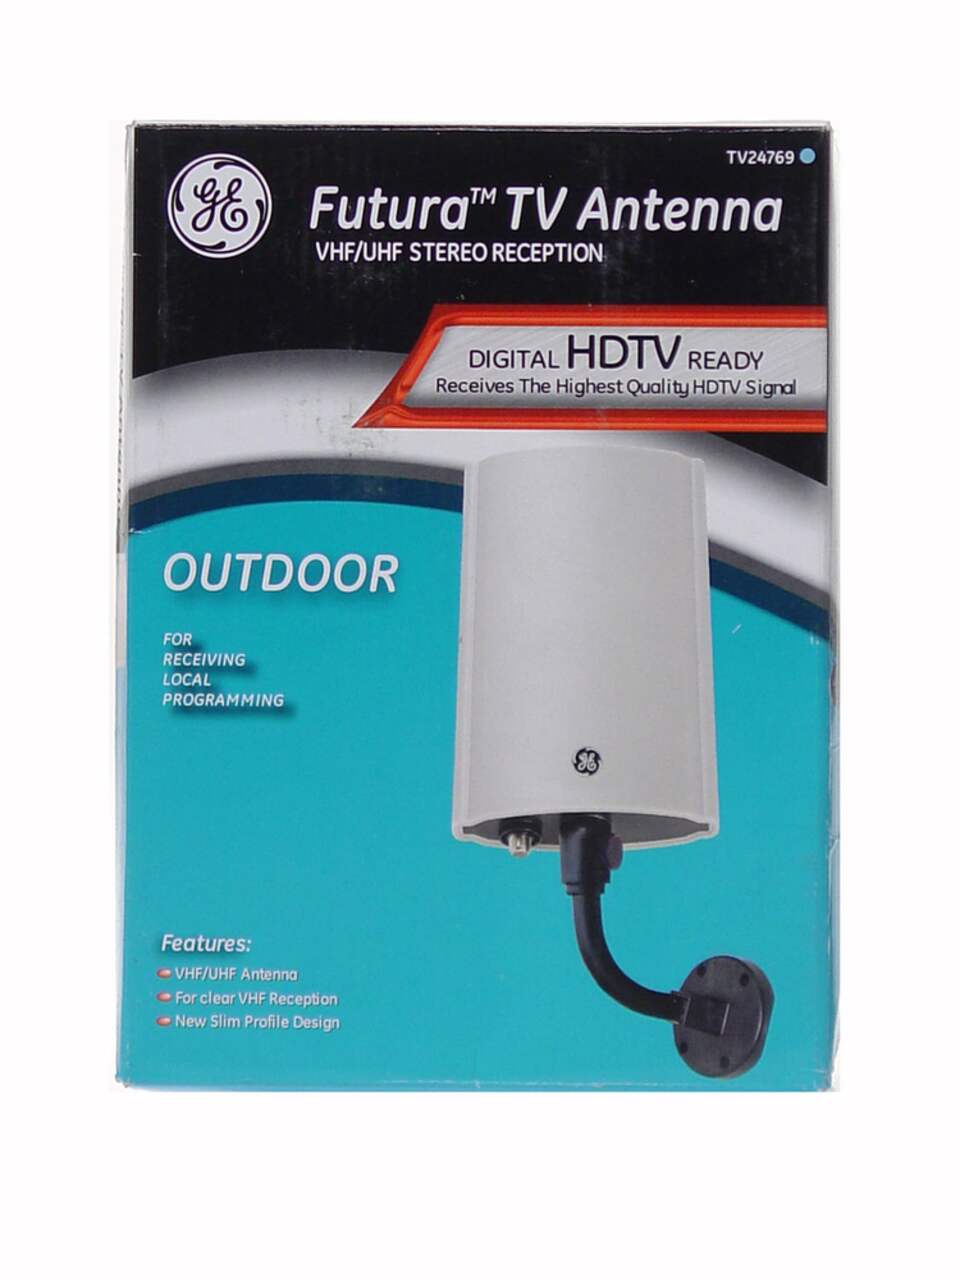 https://media-www.canadiantire.ca/product/living/electronics/home-entertainment-accessories/0452806/hdtvtvantennaout-d1d591b8-822c-4ed6-9e22-8586718a00c7.png?imdensity=1&imwidth=640&impolicy=mZoom